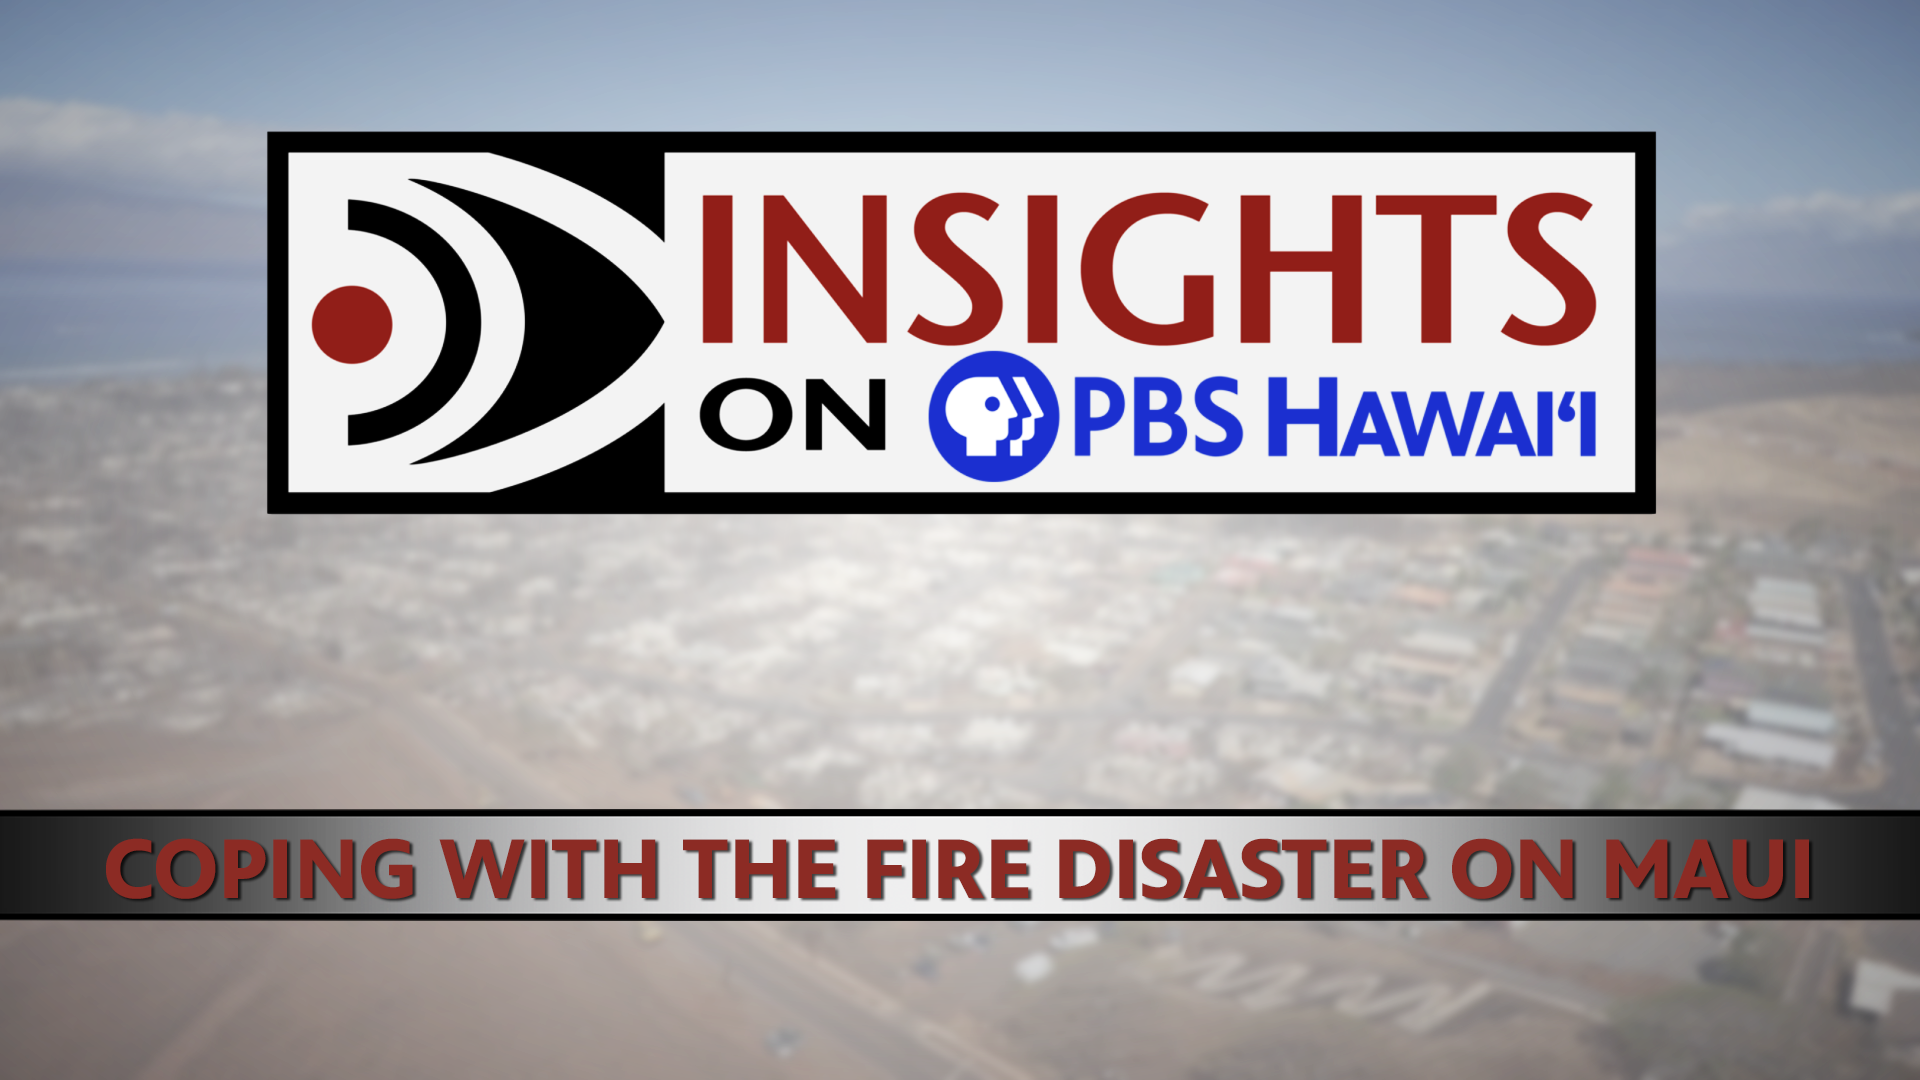 INSIGHTS ON PBS HAWAIʻI <br/>Coping with the Fire Disaster on Maui